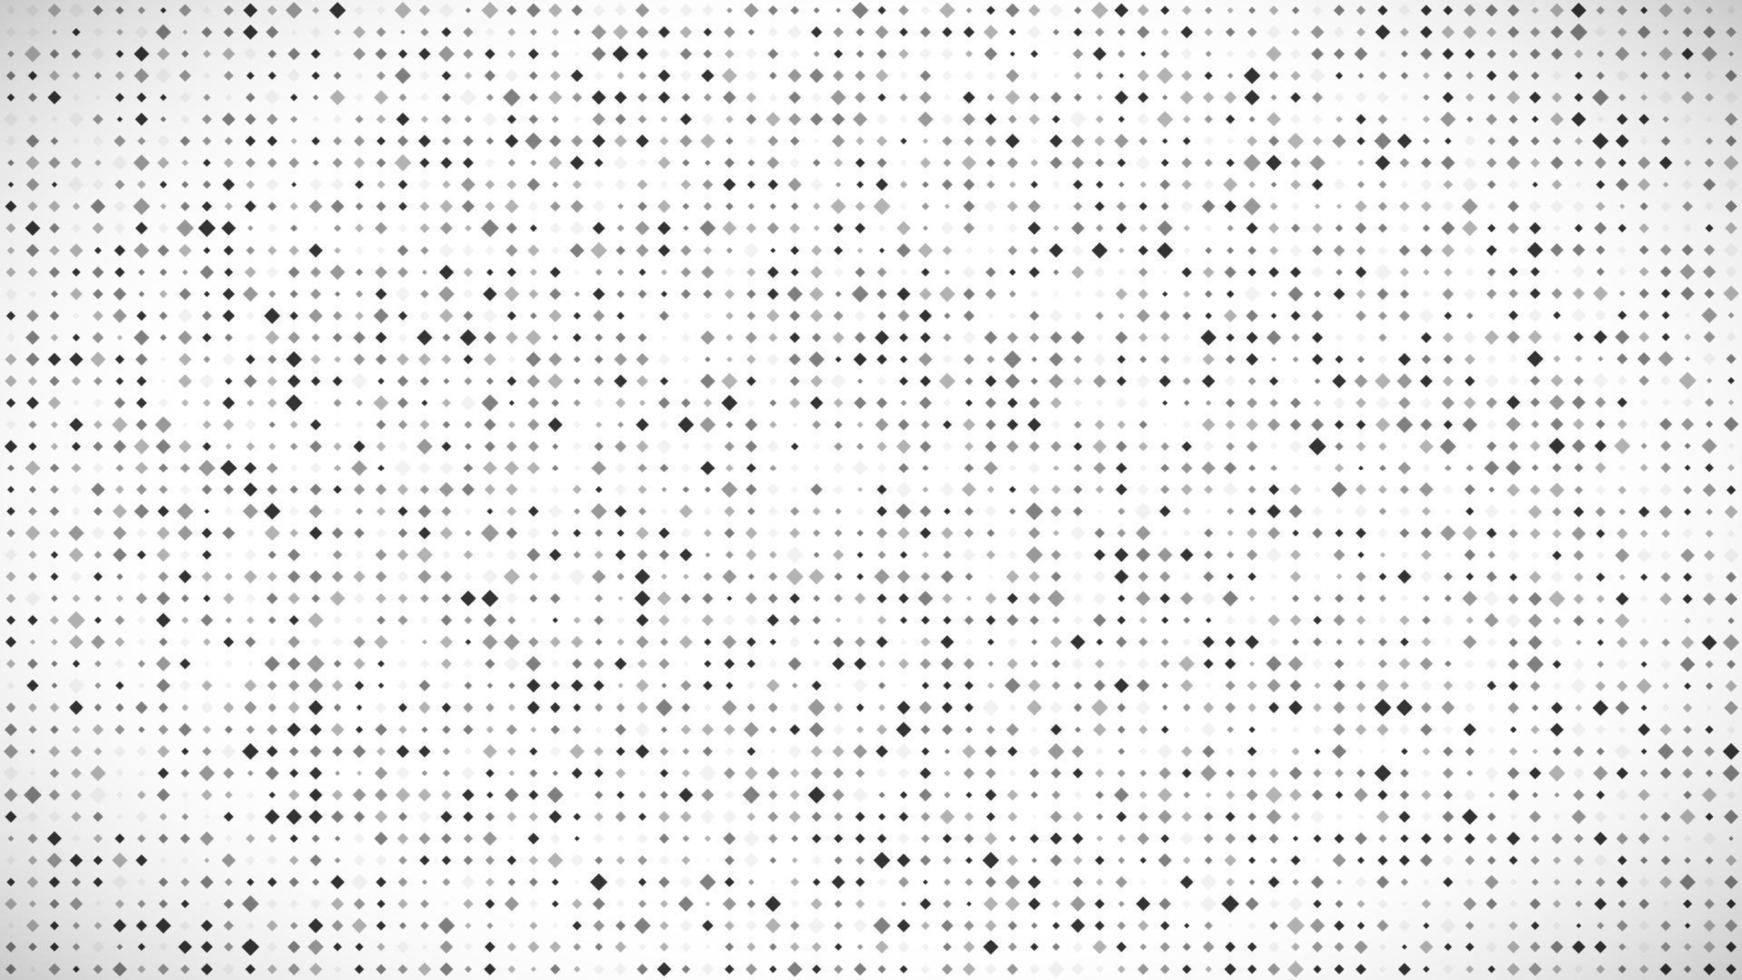 Abstract geometric background of squares. Grey pixel background with empty space. Vector illustration.